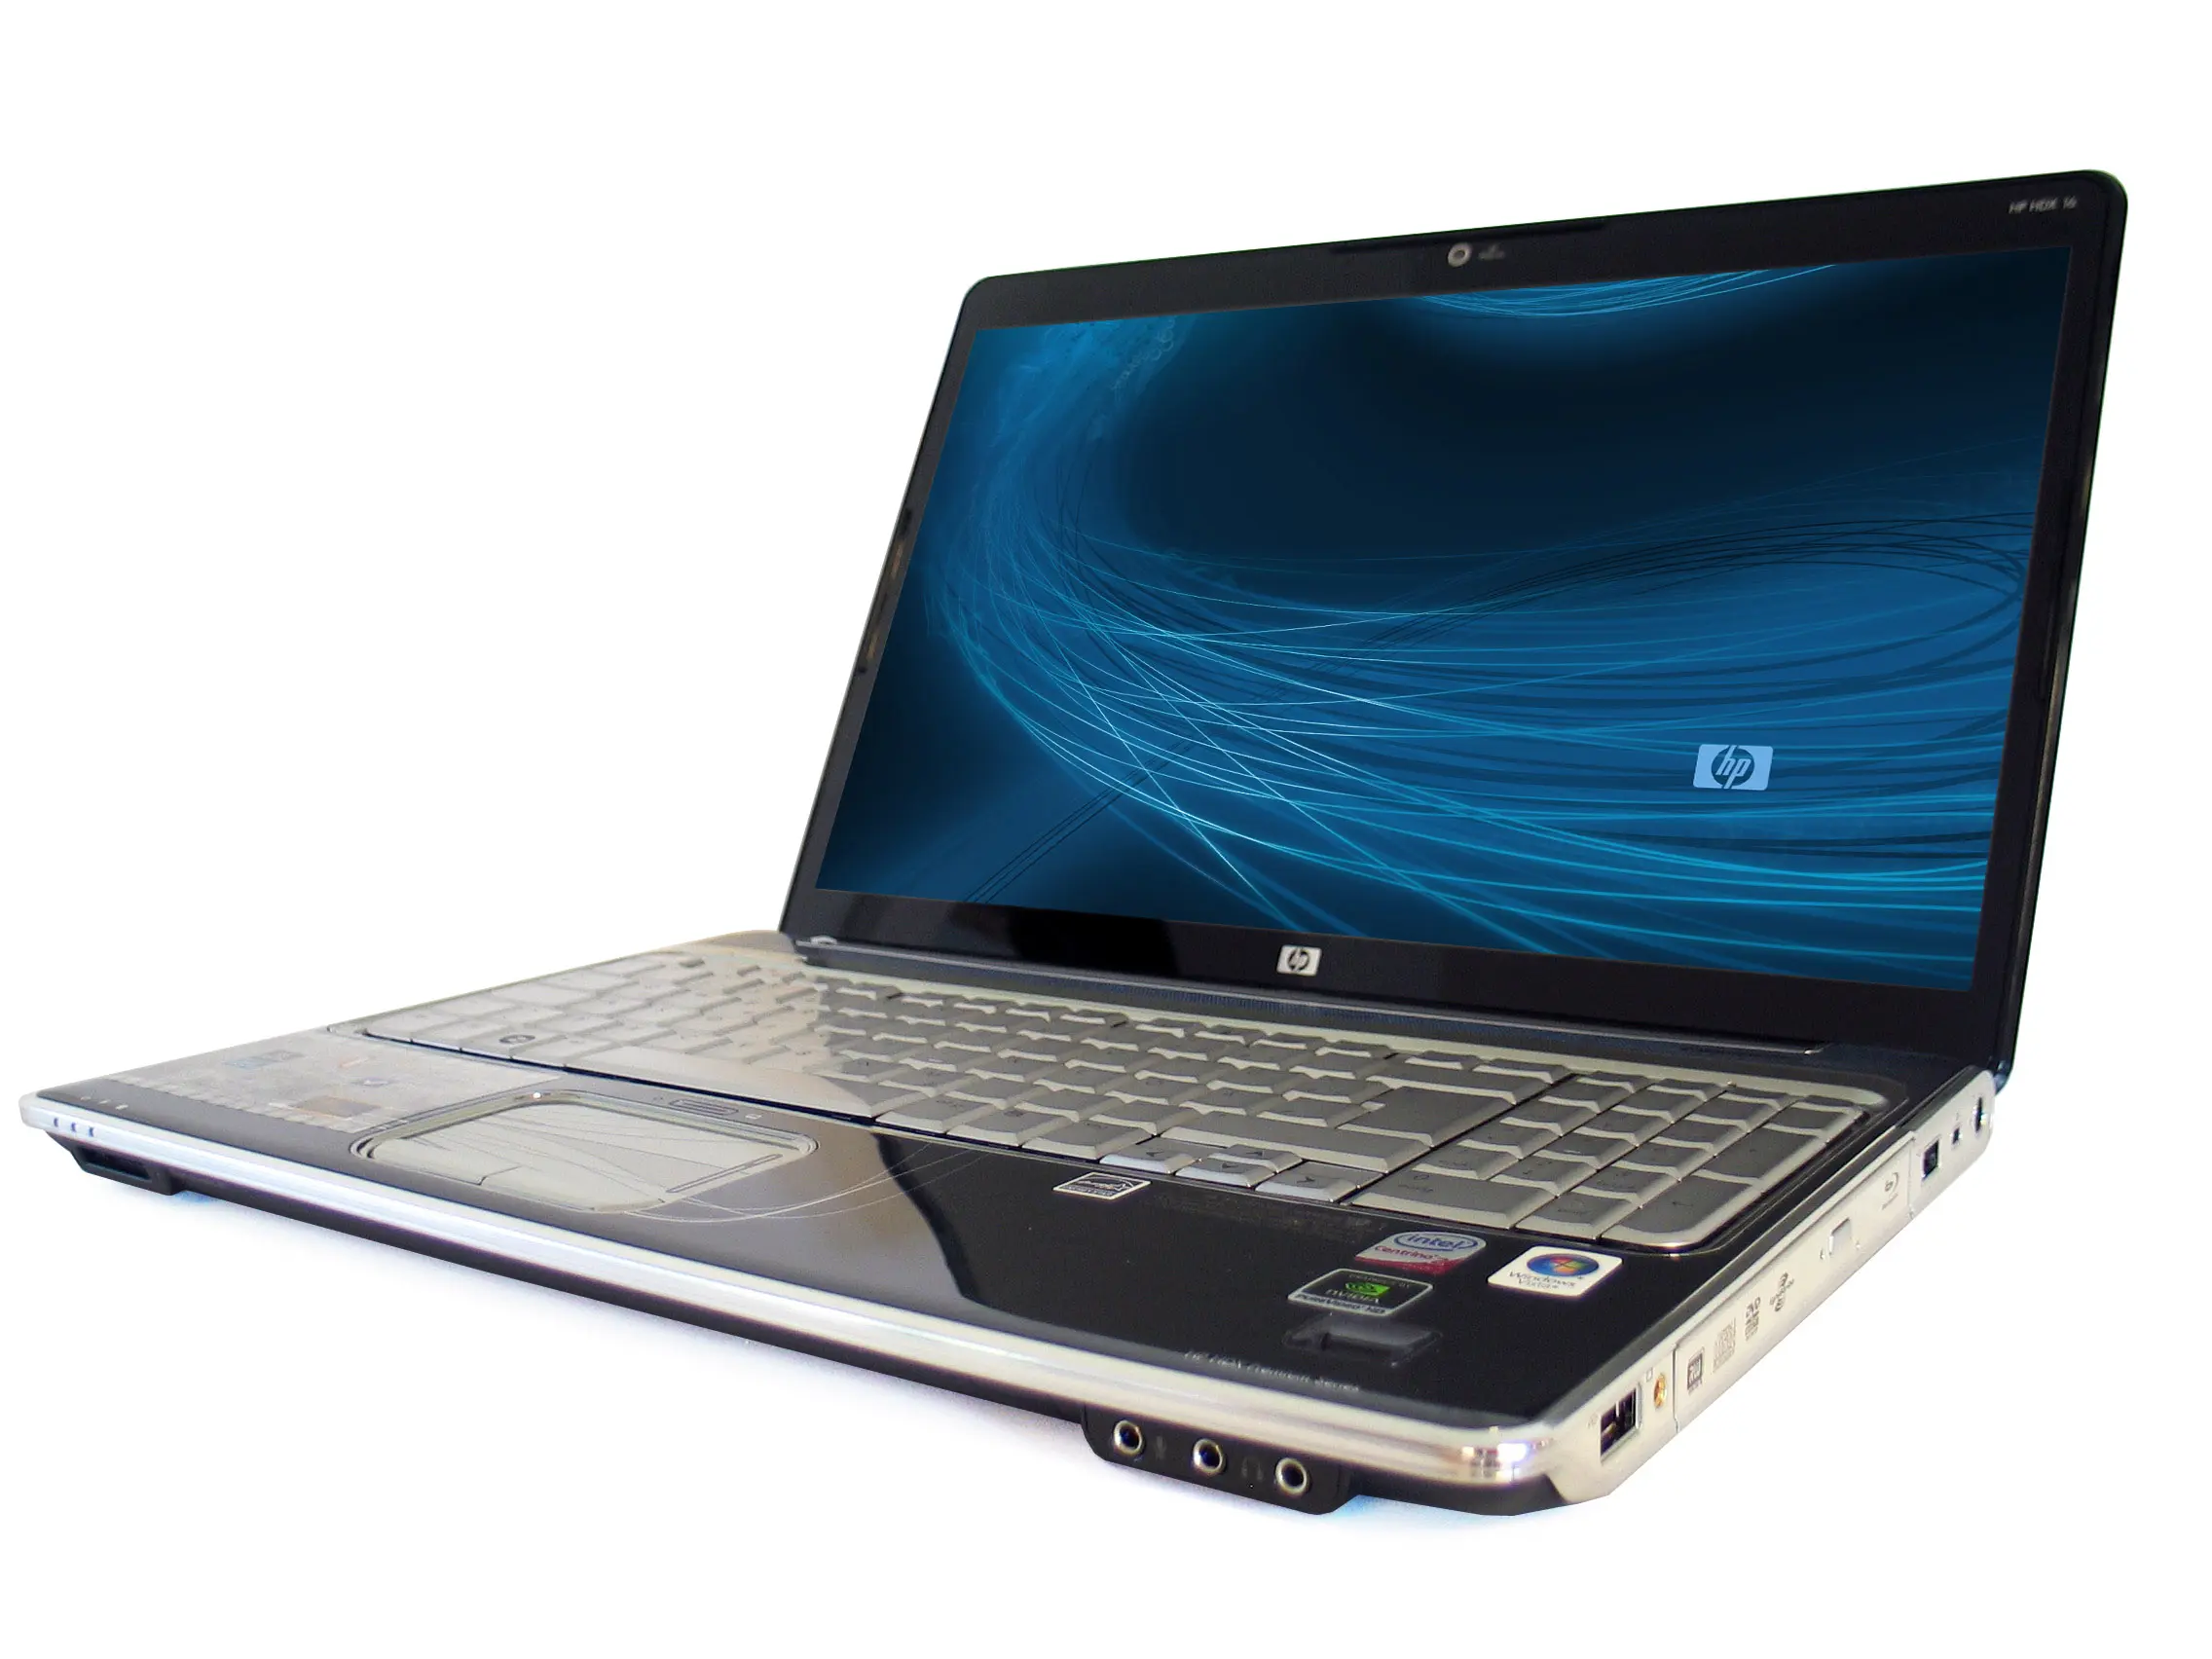 hewlett-packard hp hdx16 notebook pc - What is the price of HP Pavilion G6 red laptop